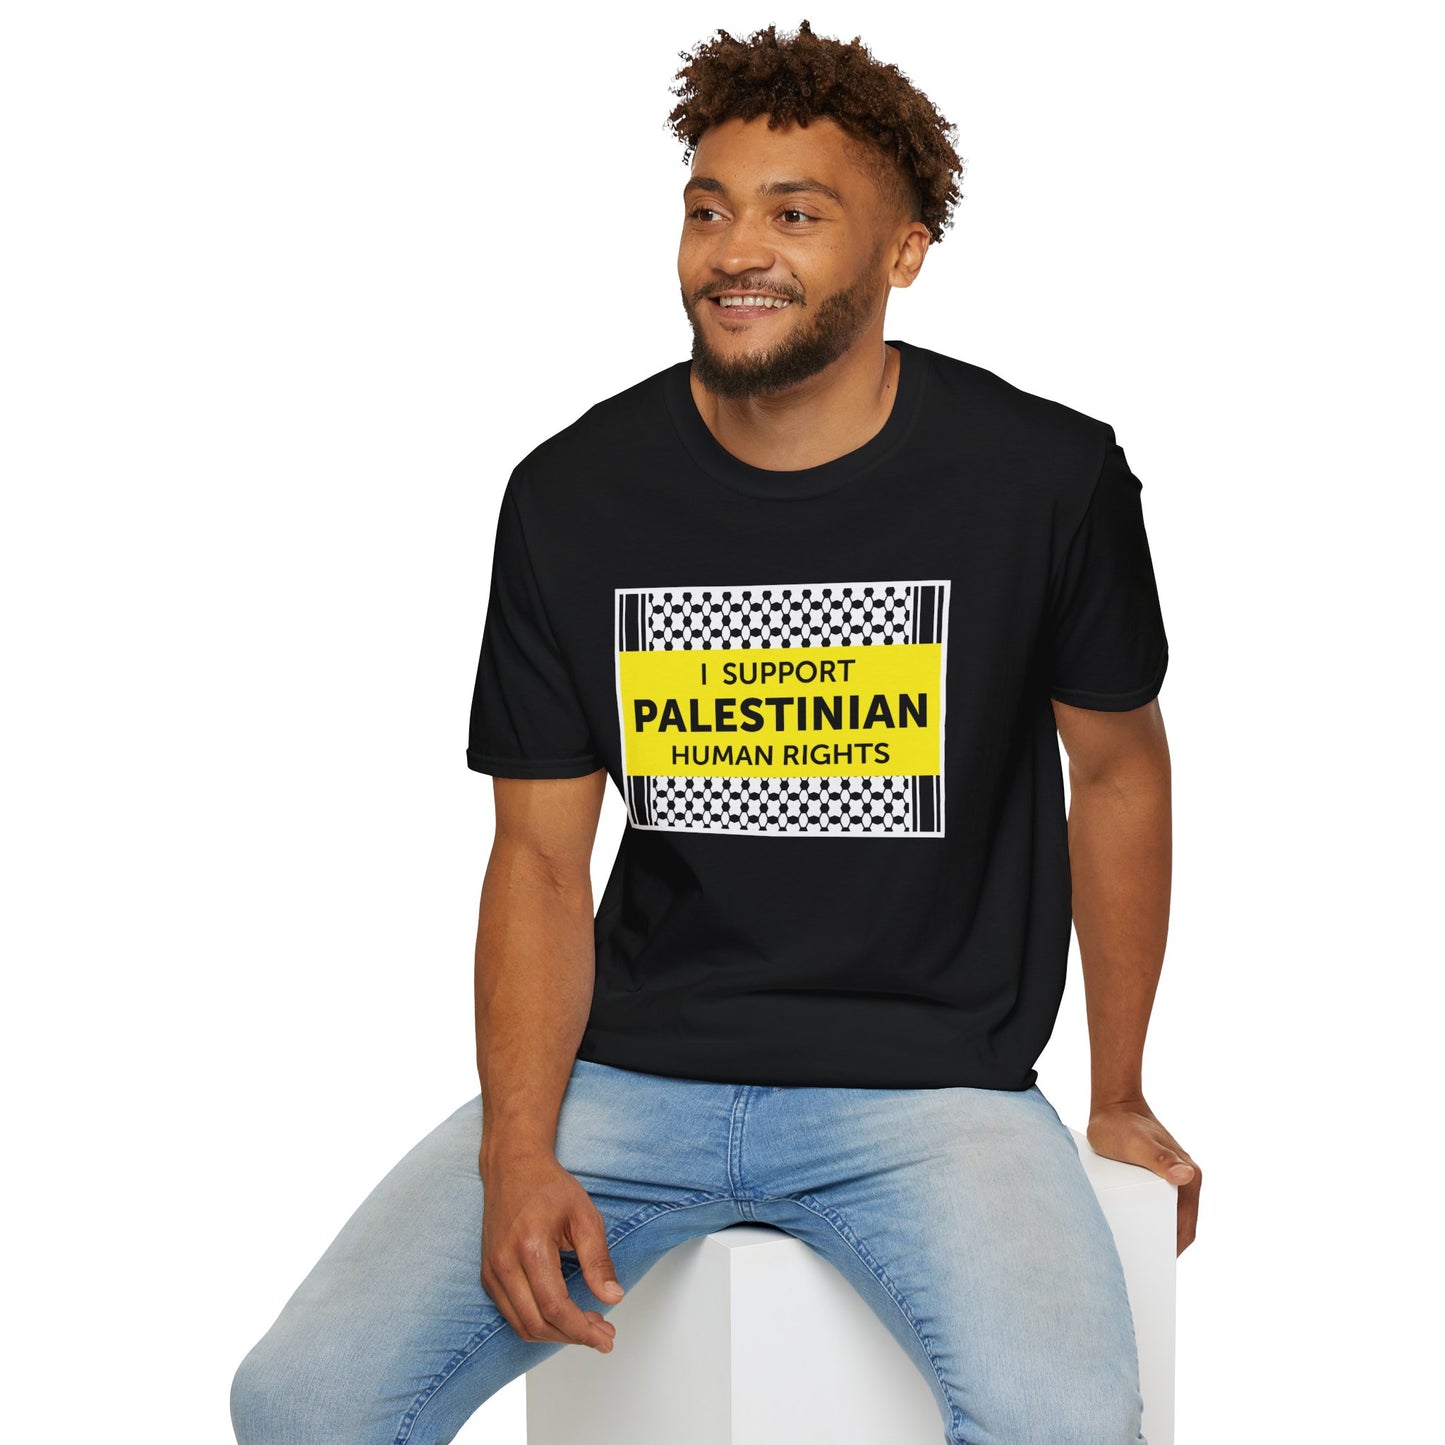 “I Support Palestinian Human Rights” Unisex T-Shirt